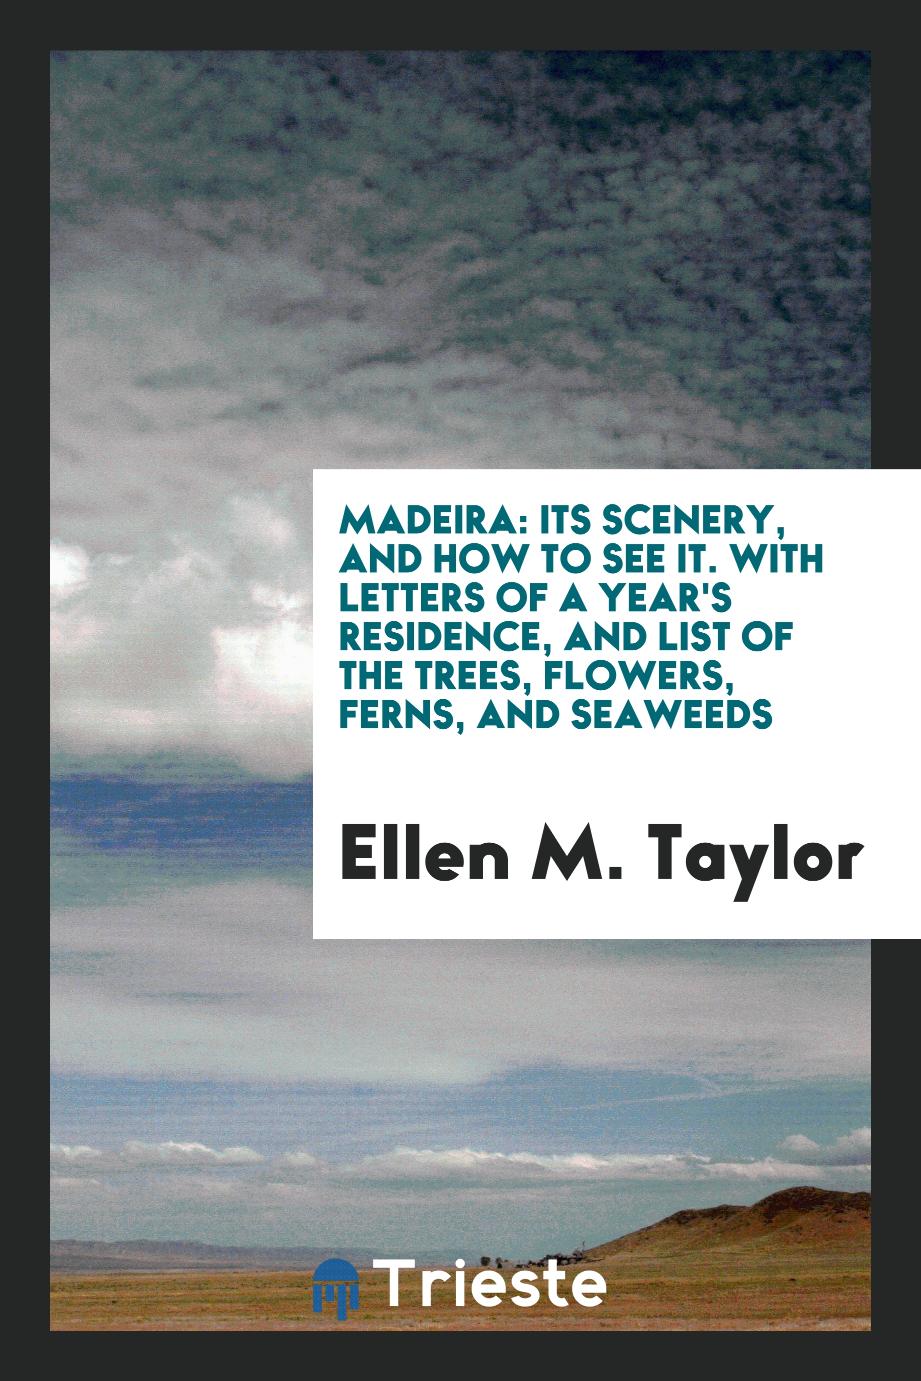 Madeira: Its Scenery, and How to See It. With Letters of a Year's Residence, and List of the Trees, Flowers, Ferns, and Seaweeds